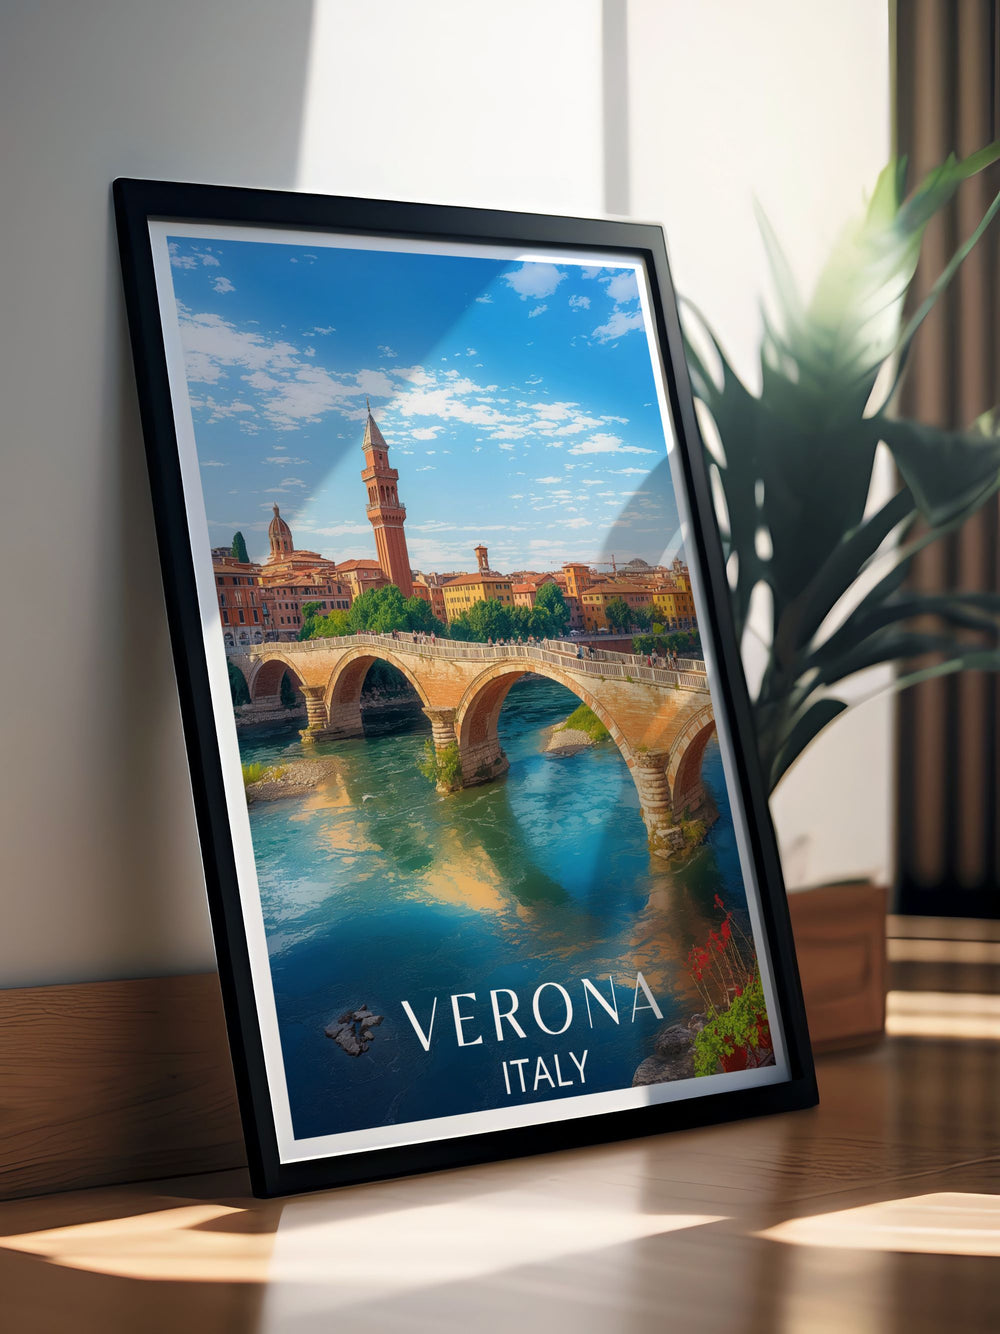 Elegant Ponte Pietra artwork depicting the timeless beauty of this iconic Verona landmark ideal for adding a touch of Italian art to any home decor or as a thoughtful Italy travel gift for lovers of Verona and its rich history.